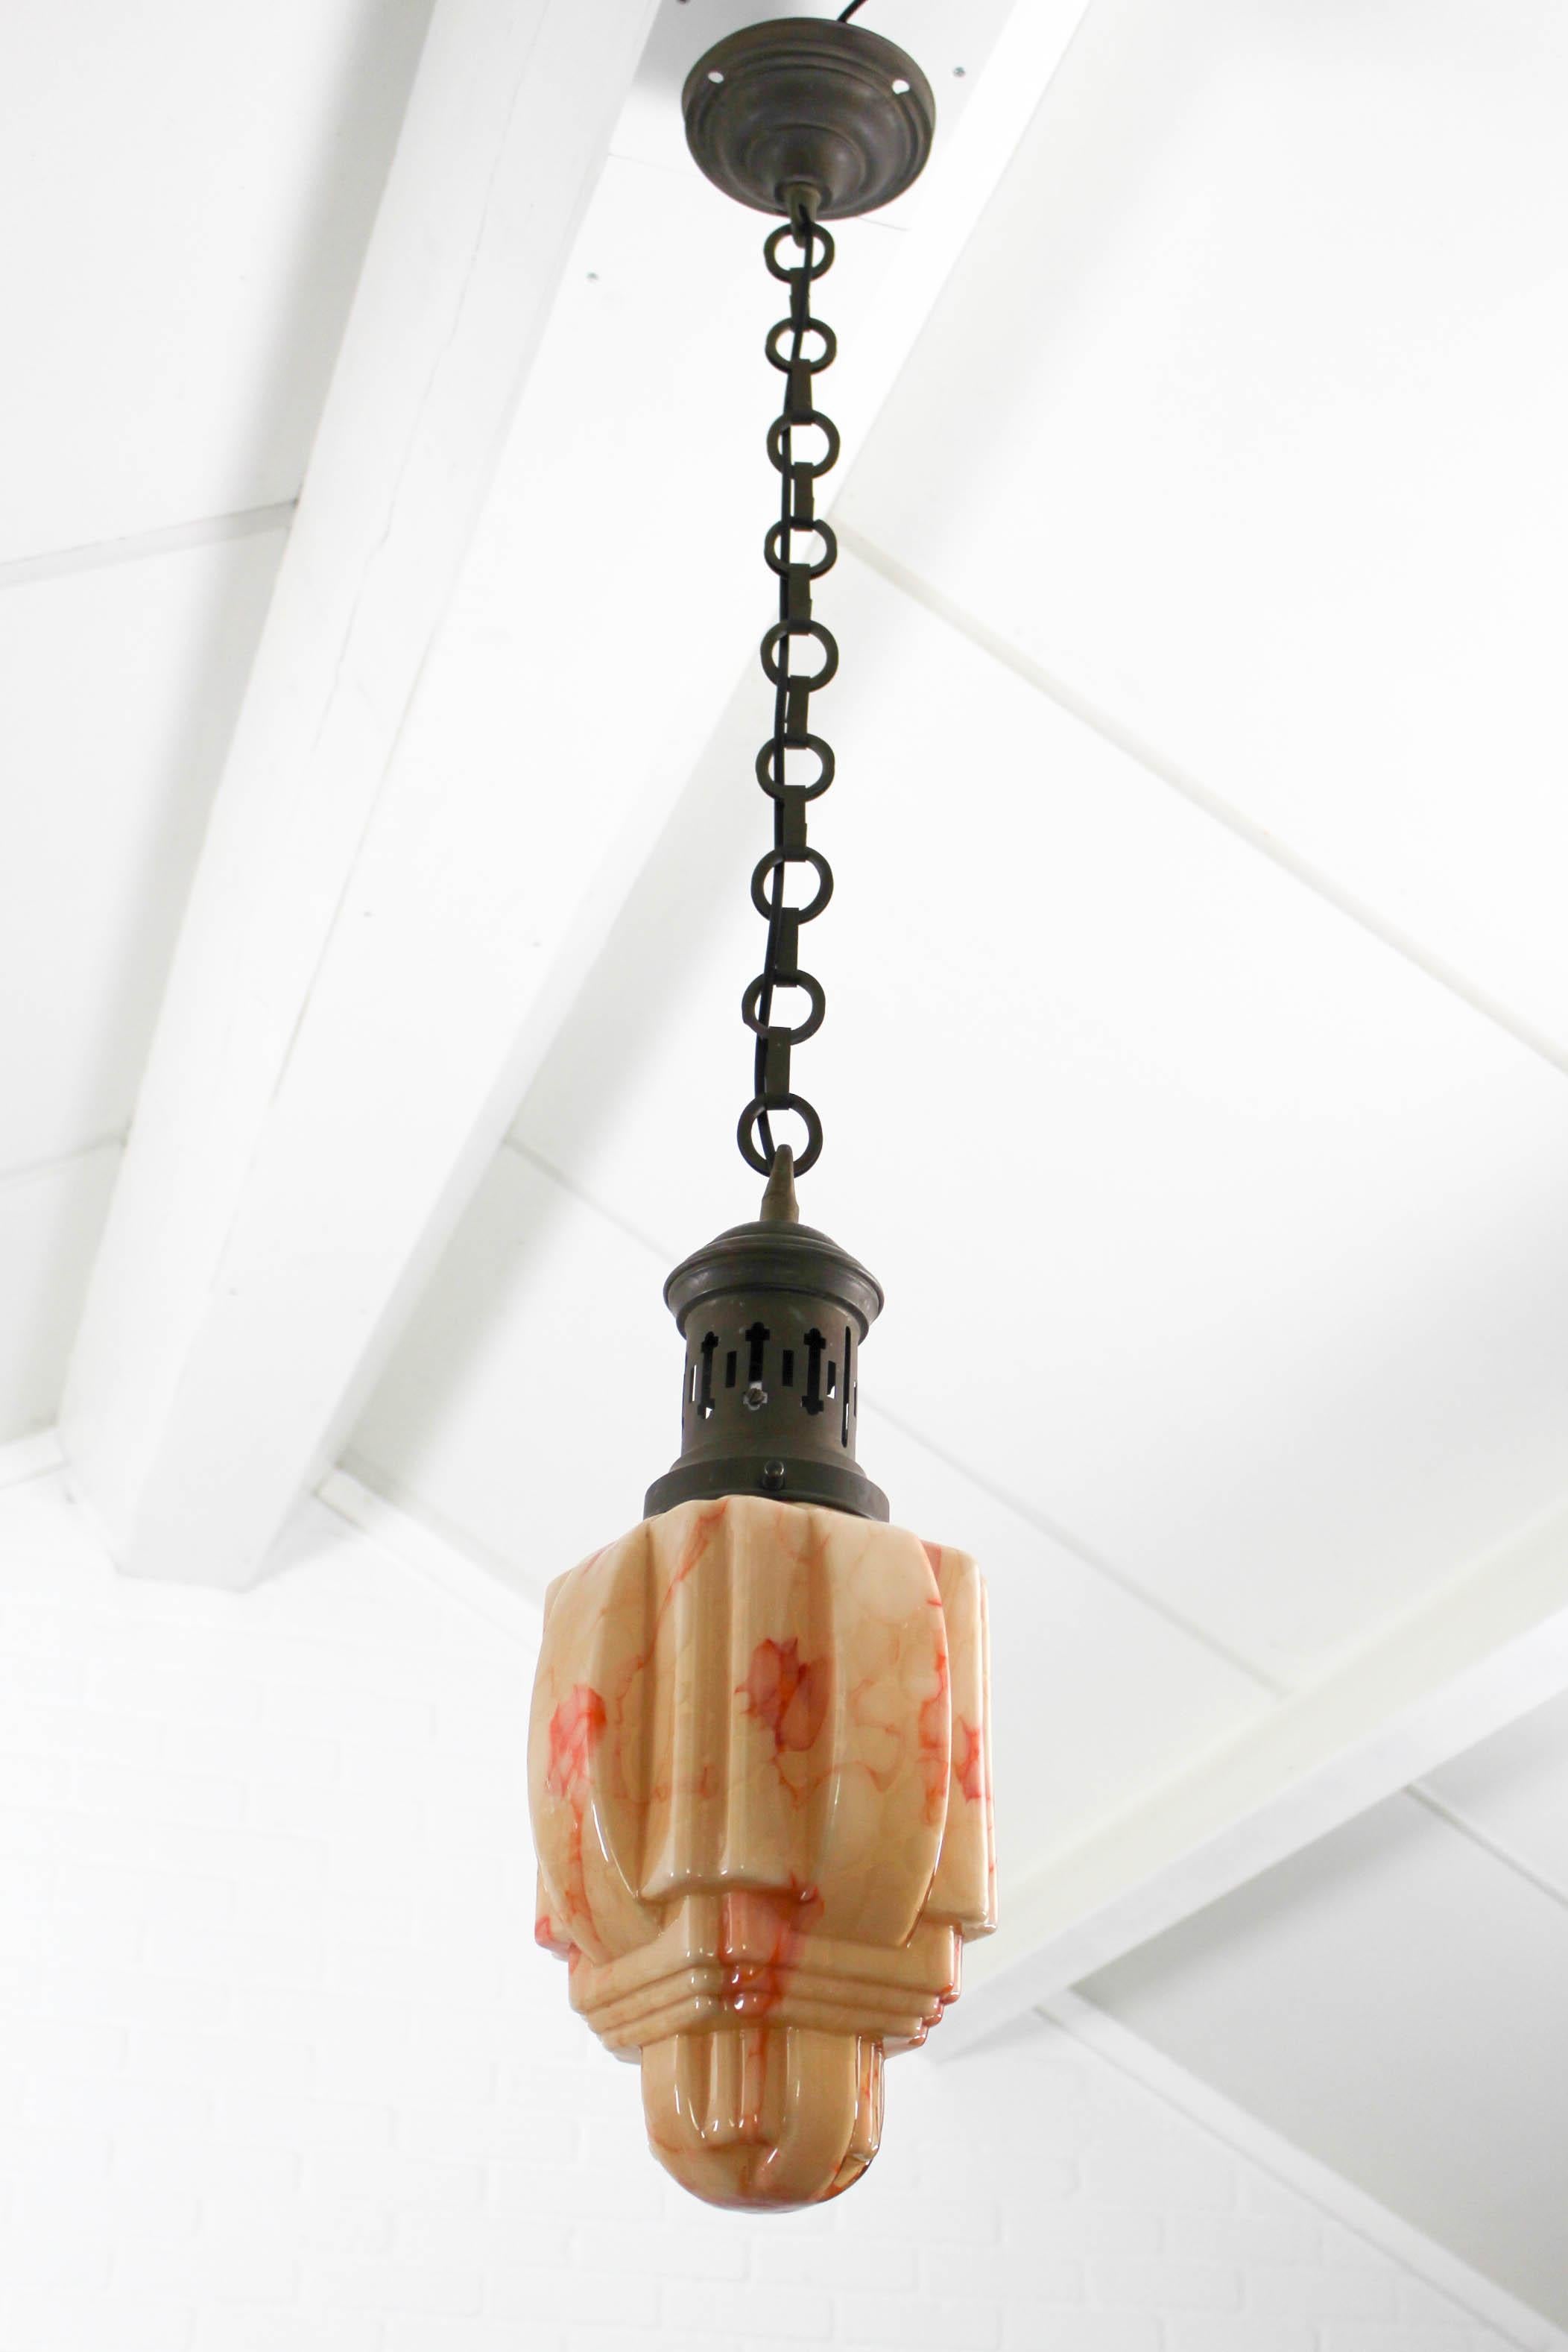 Unique and not often seen pendant ceiling light with screw fixing to hold a stylish Art Deco lampshade of substantial size. This fixture give illumination full of warmth and love. A perfect example of Art Nouveau decorative arts, an original piece,